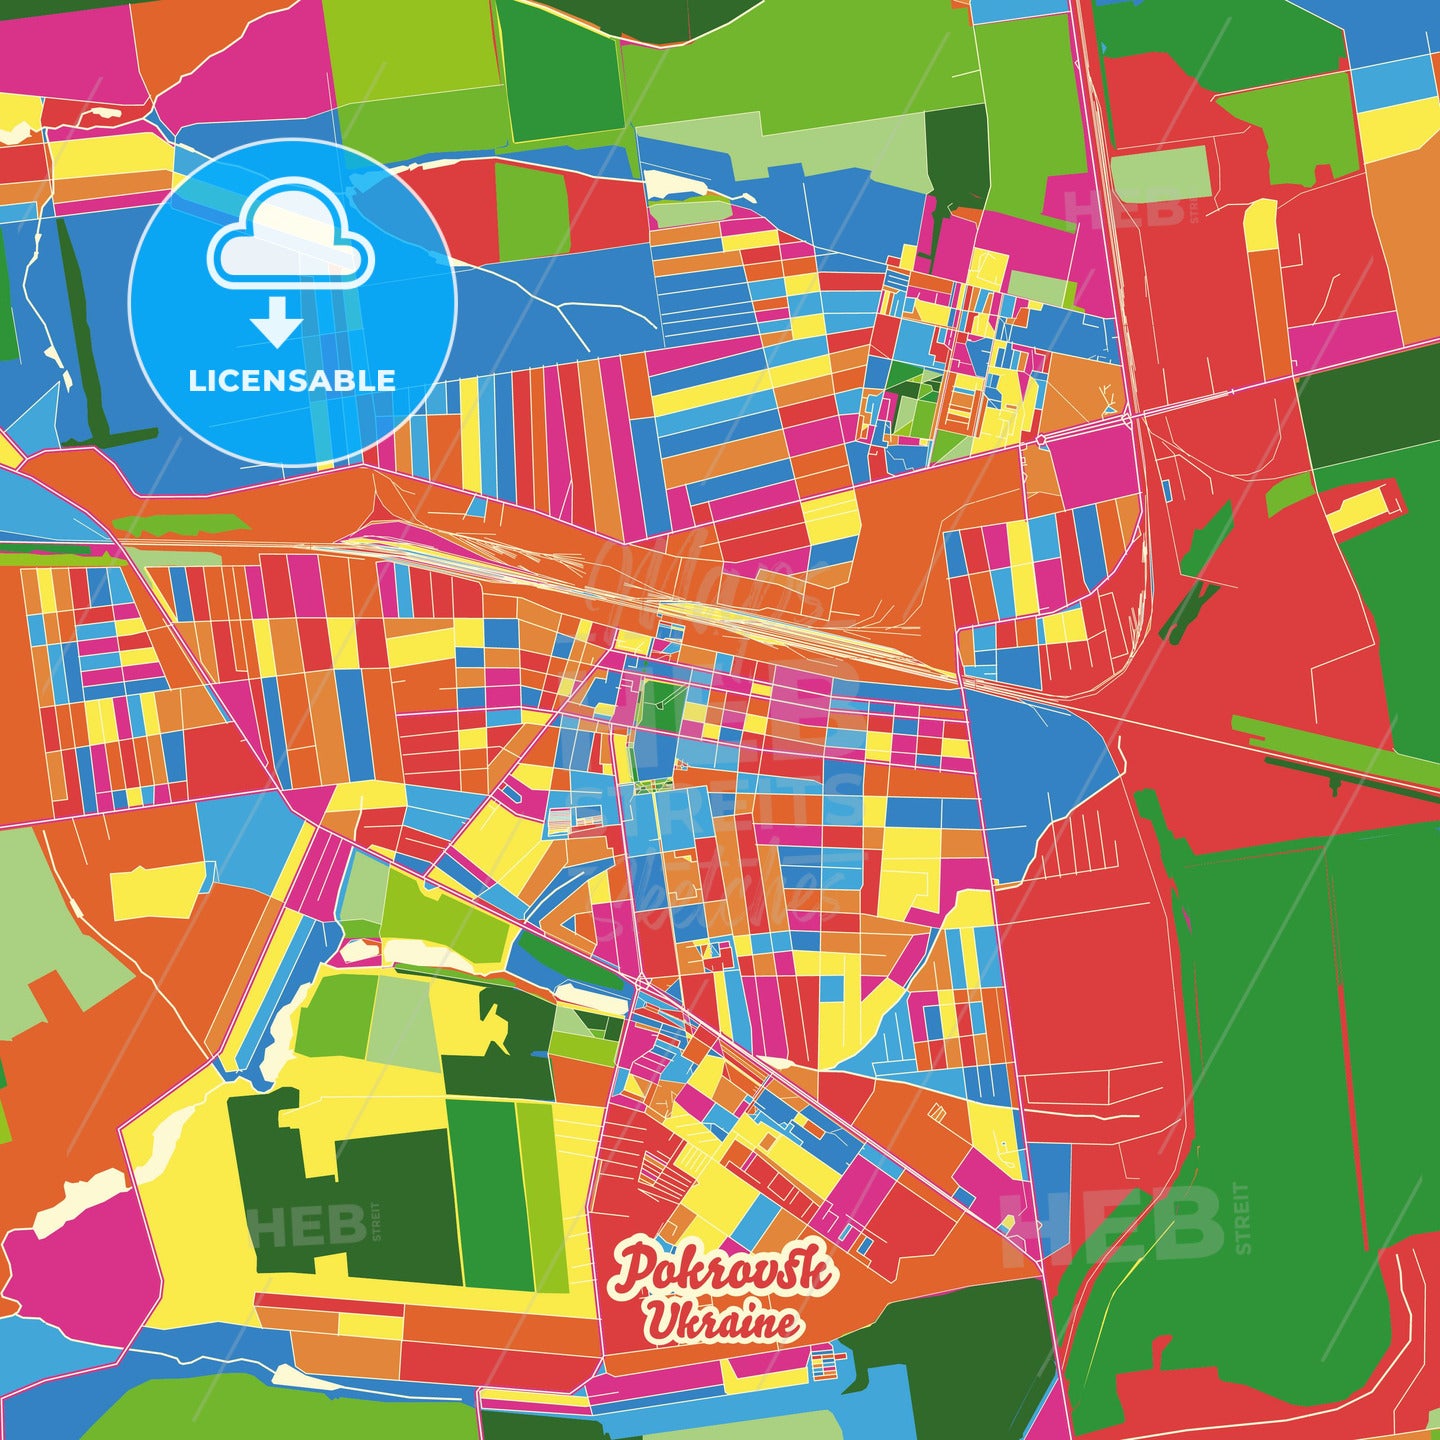 Pokrovsk, Ukraine Crazy Colorful Street Map Poster Template - HEBSTREITS Sketches